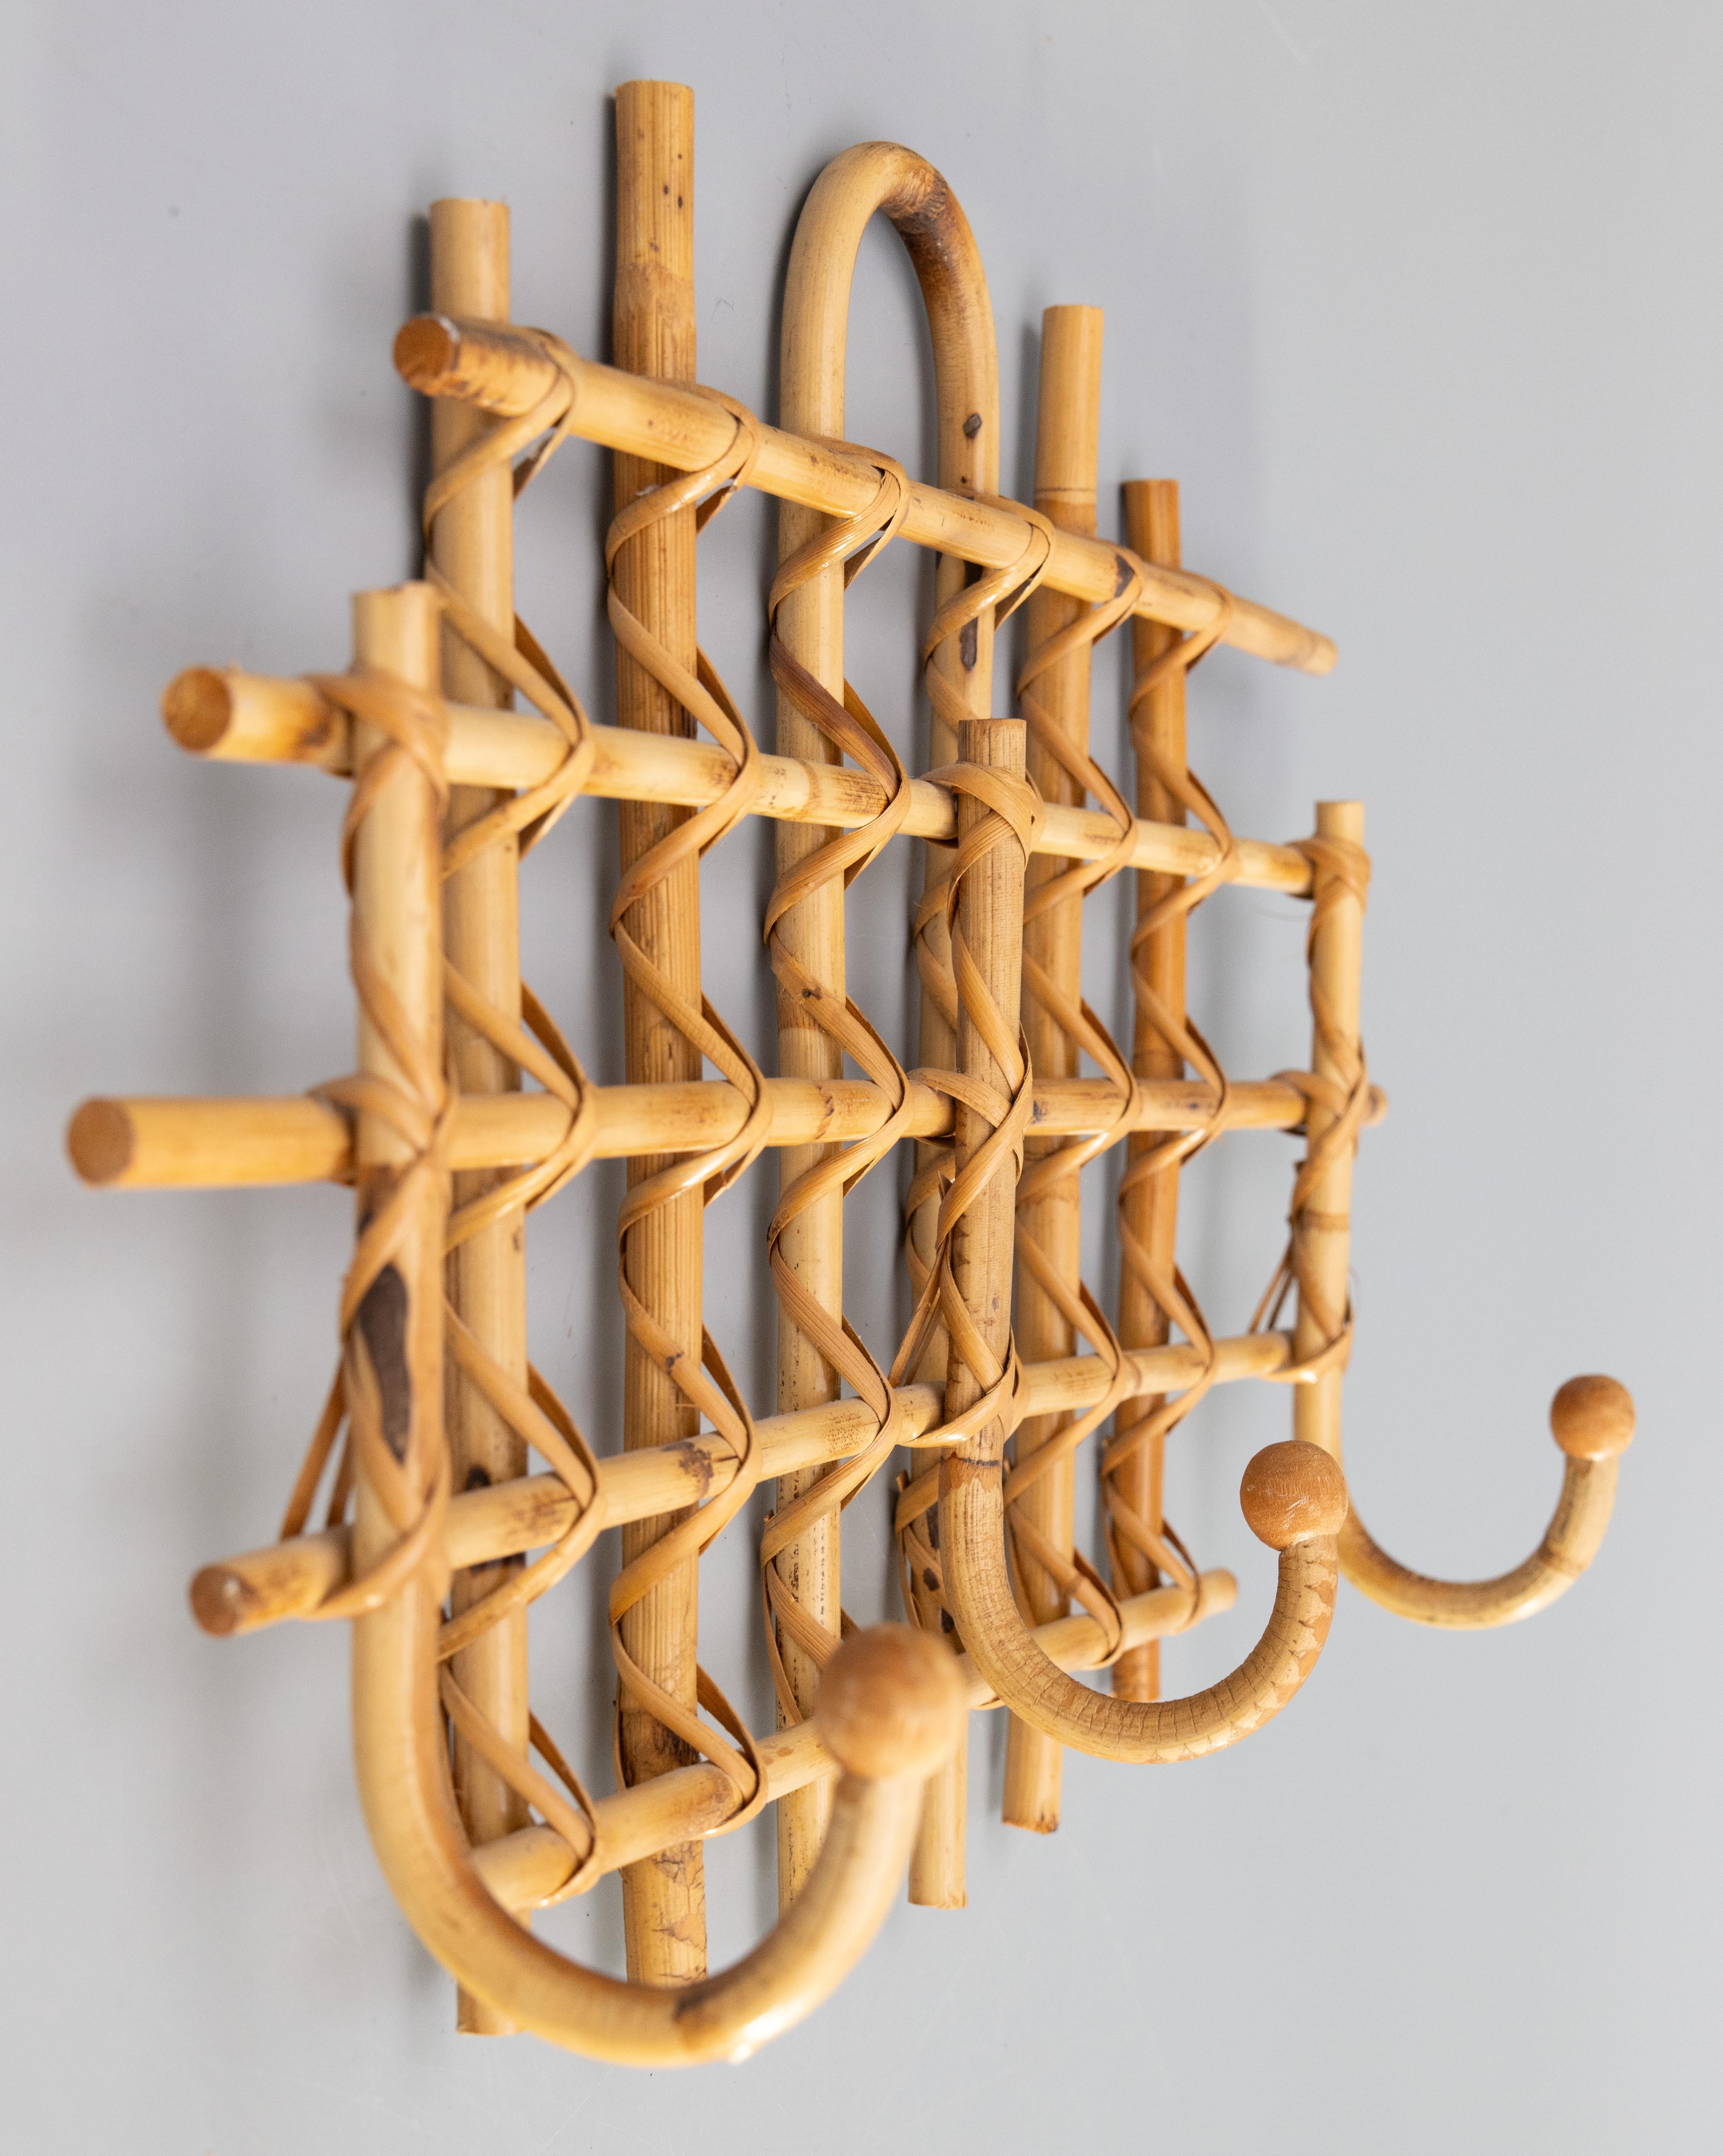 A stylish Mid-Century French rattan and bamboo coat and hat rack with three hangers. It's a nice large size with a lovely design and three curved hooks, perfect for hanging jackets and hats in an entryway or mudroom.

DIMENSIONS
22ʺW × 5ʺD × 15.25ʺH